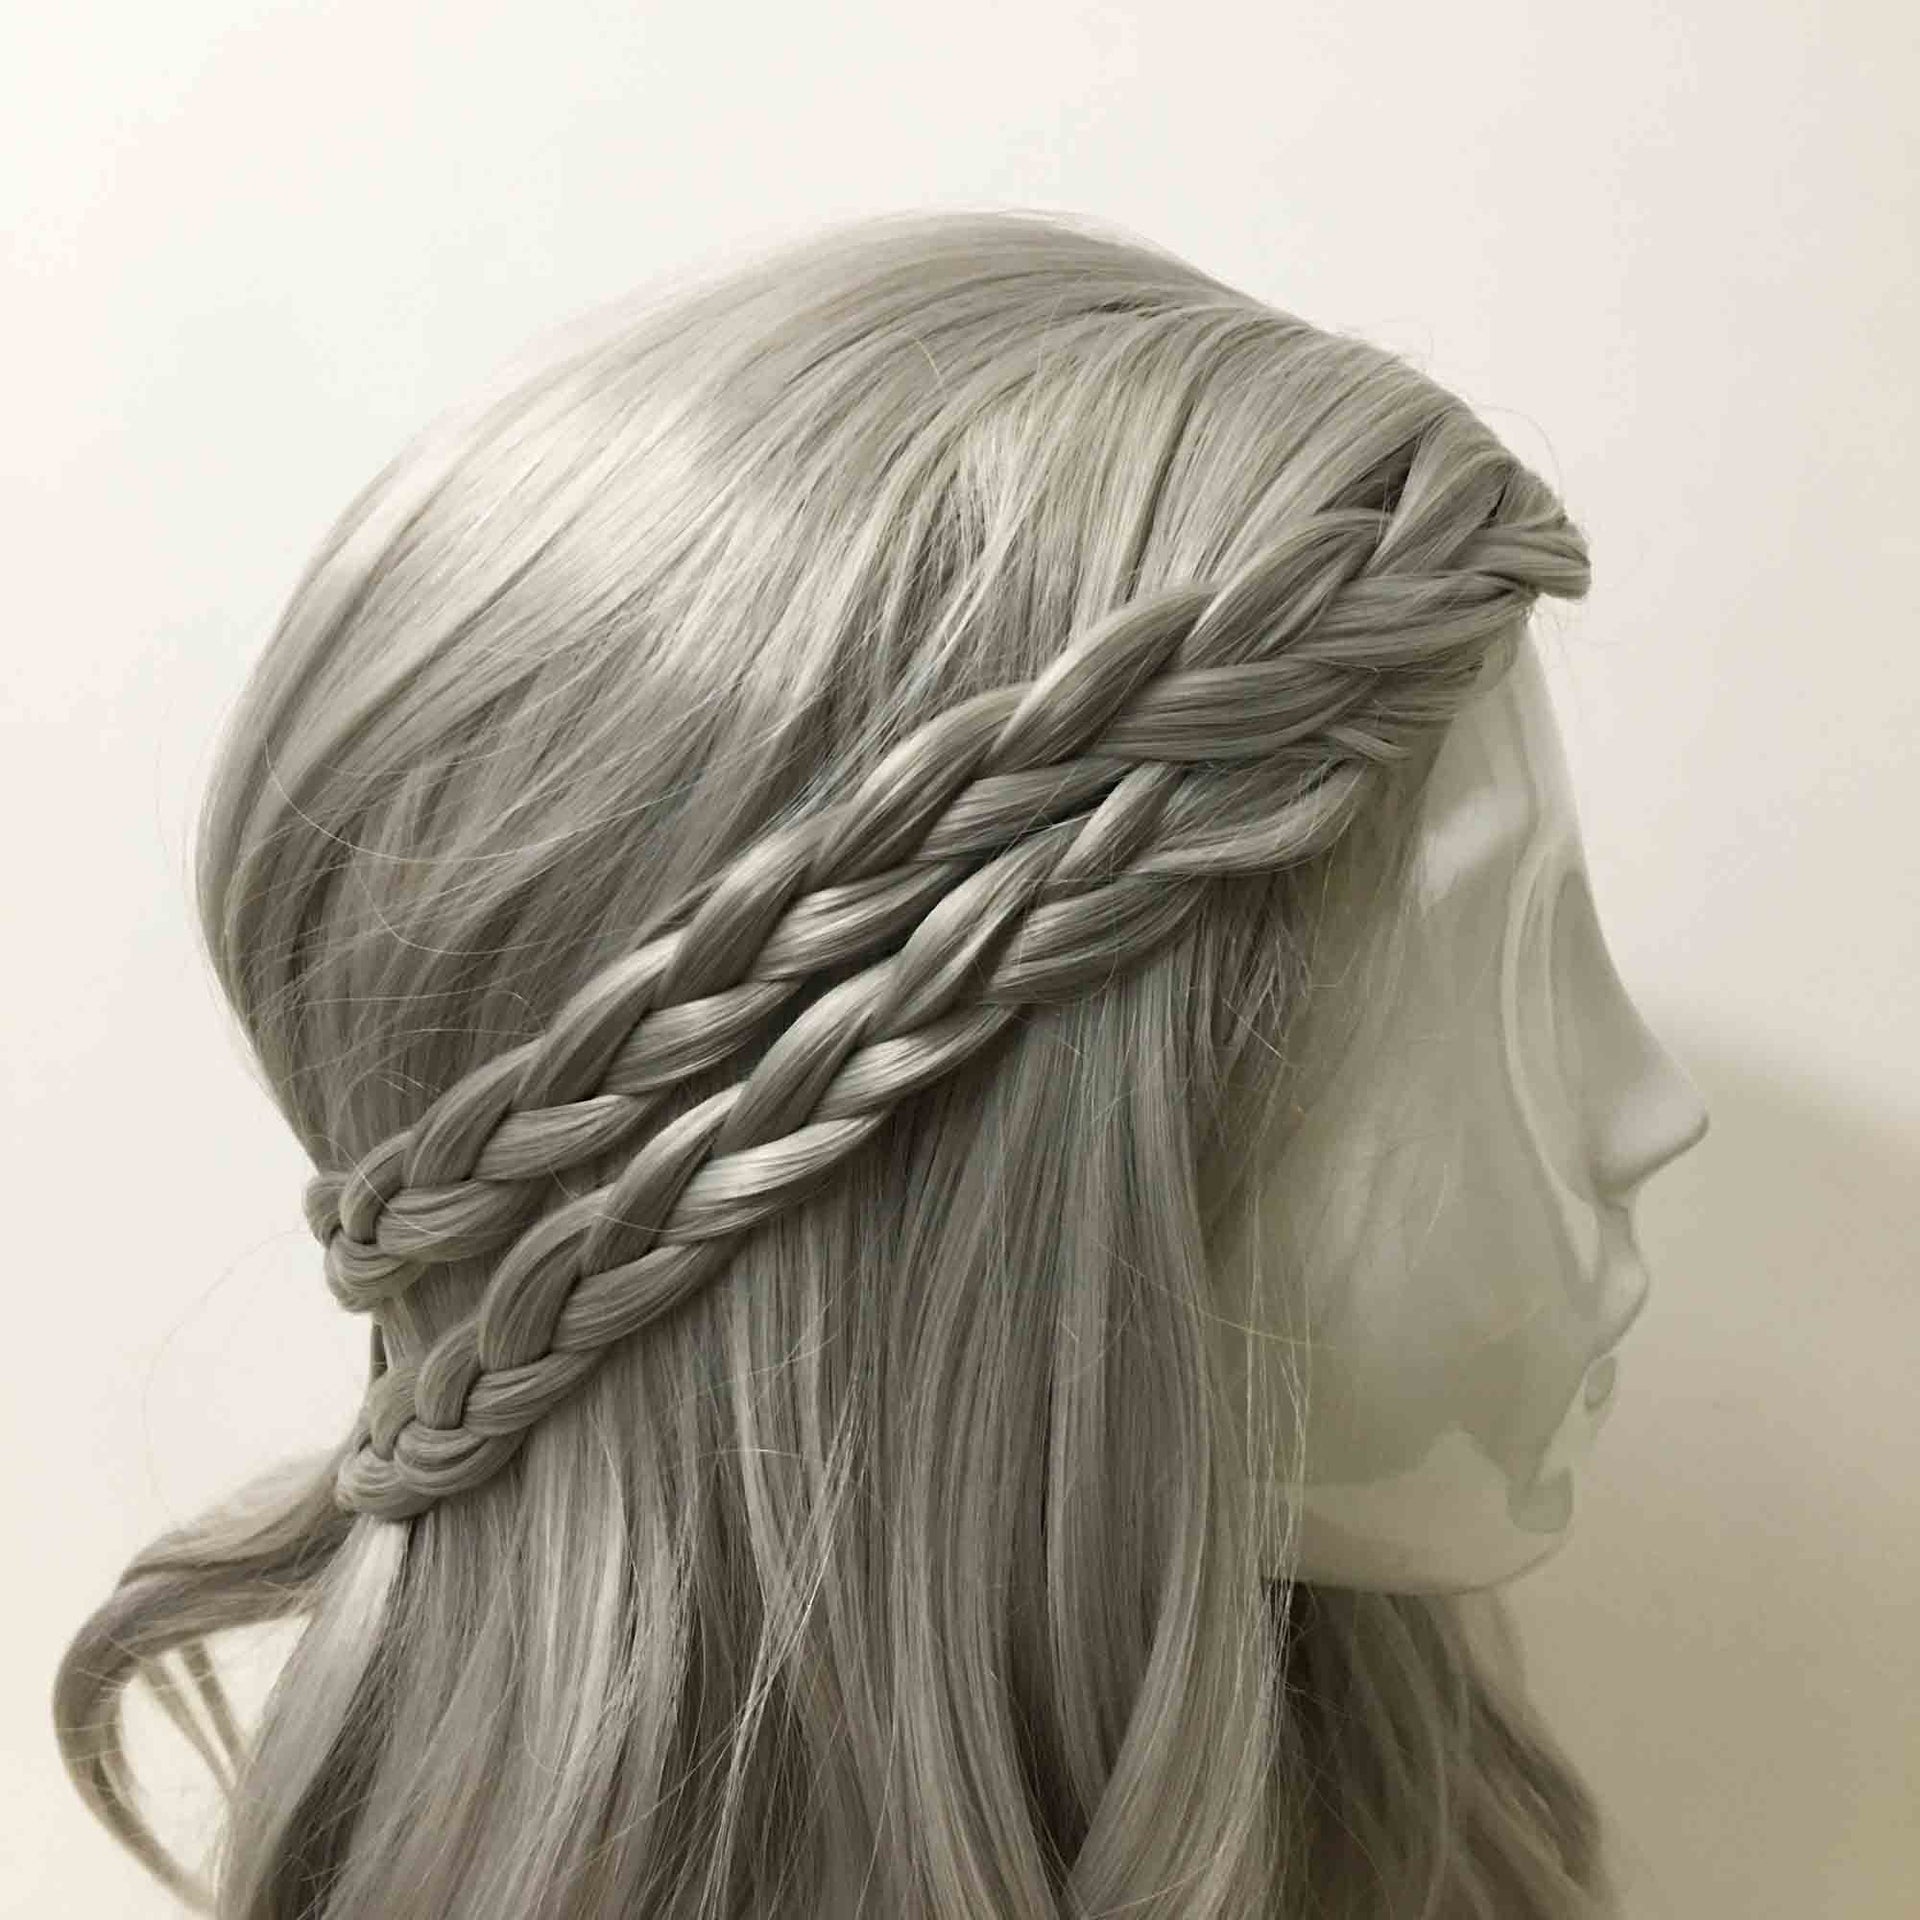 nevermindyrhead Women Gray Long Curly Princess Style Braided Middle Part Cosplay Wig